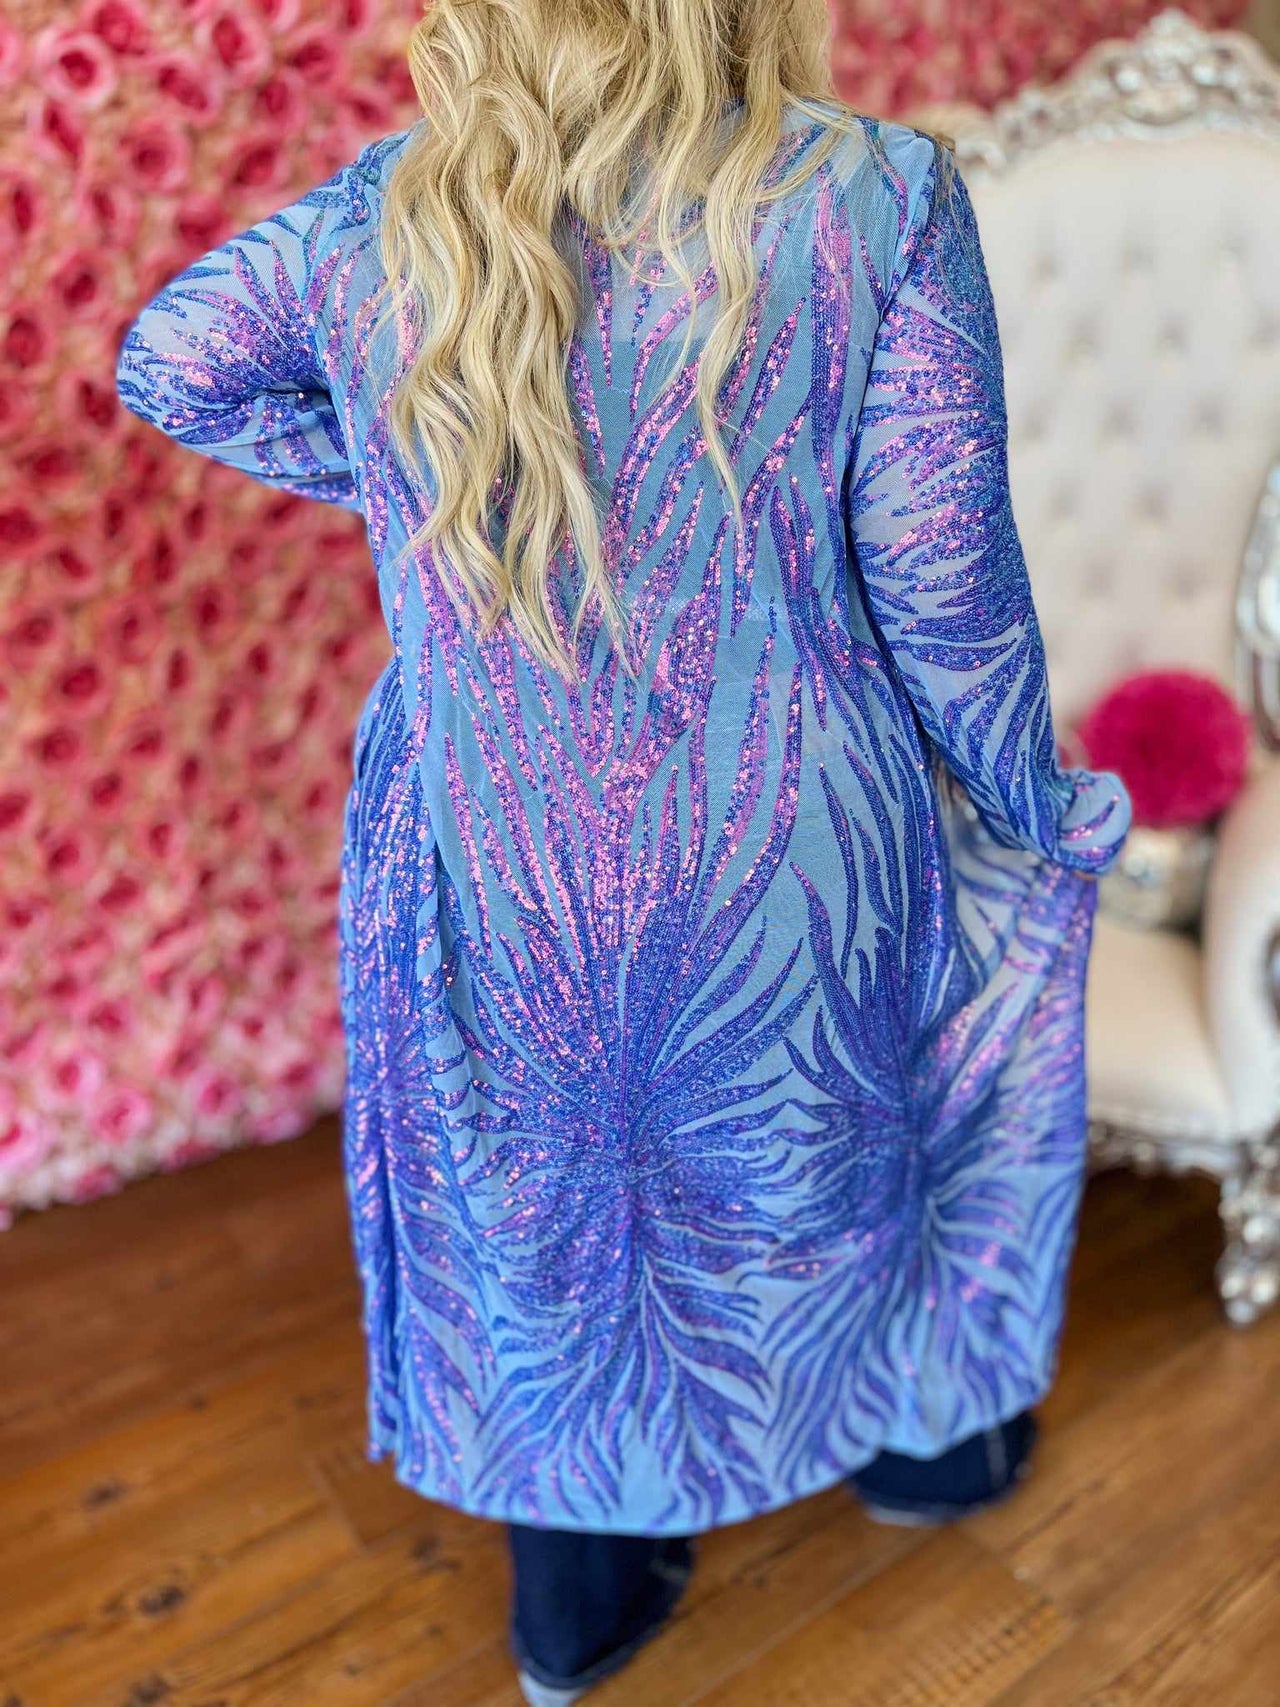 The Royal Sequin Duster - Unicorn